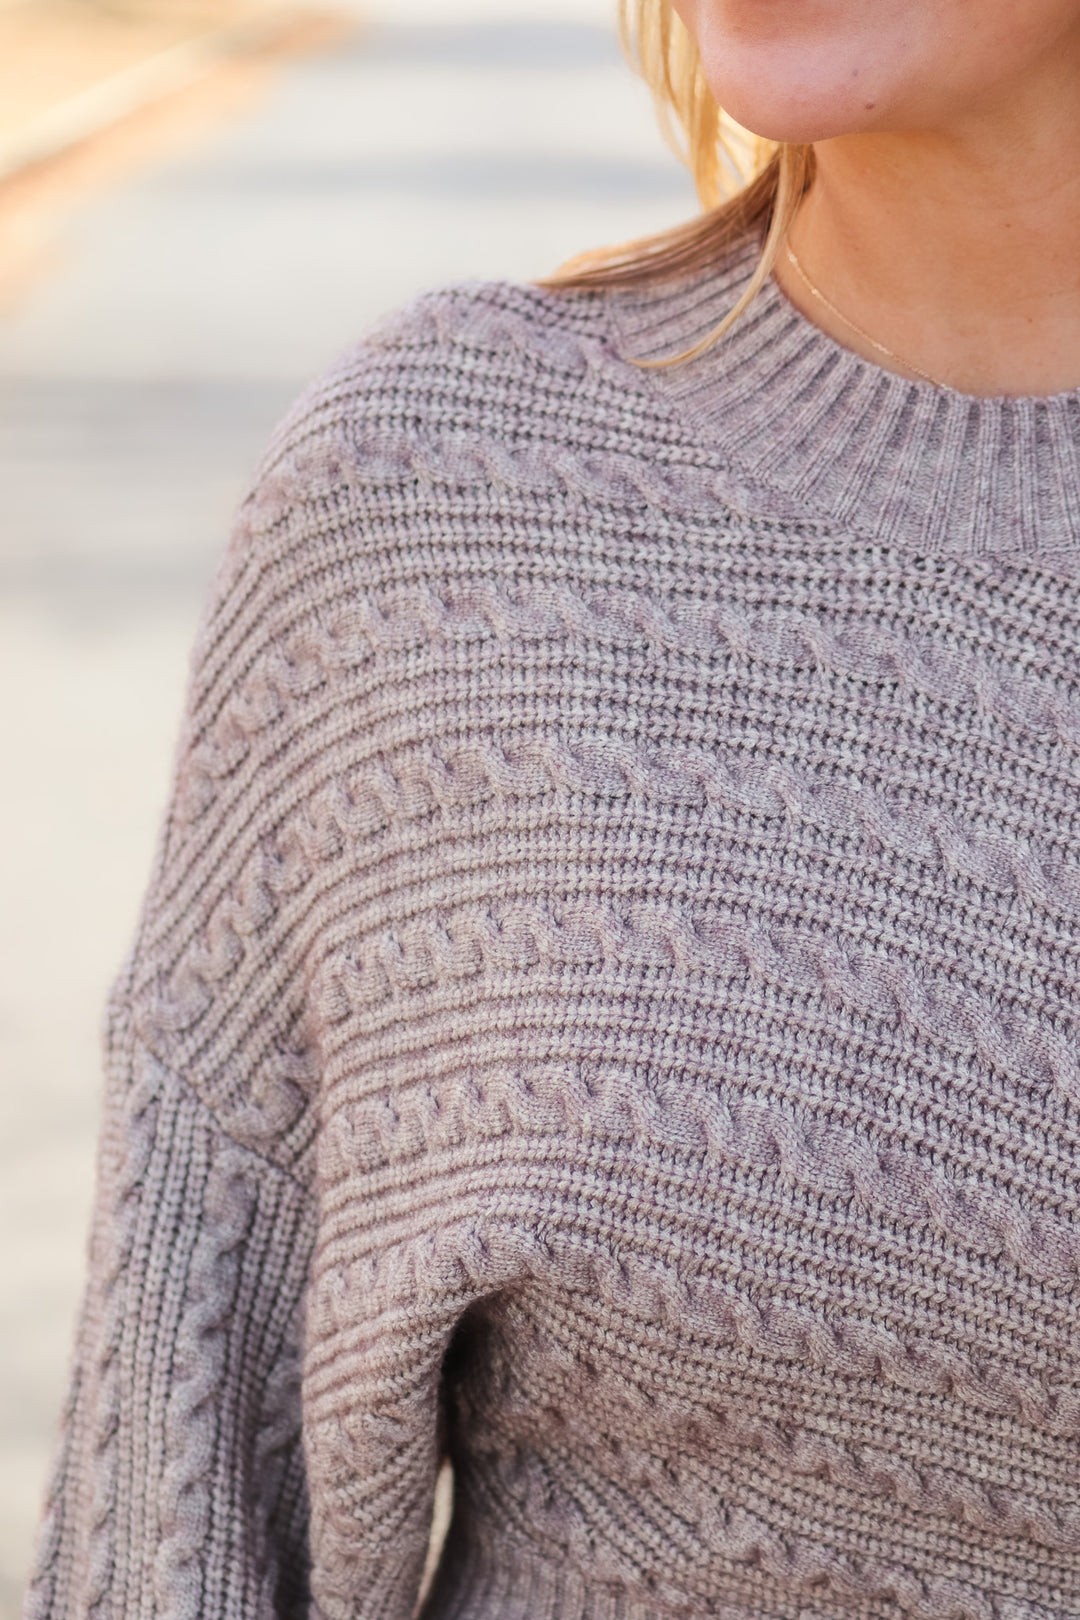 A closeup of the shoulder of a woman wearing a taupe colored cable knit sweater.